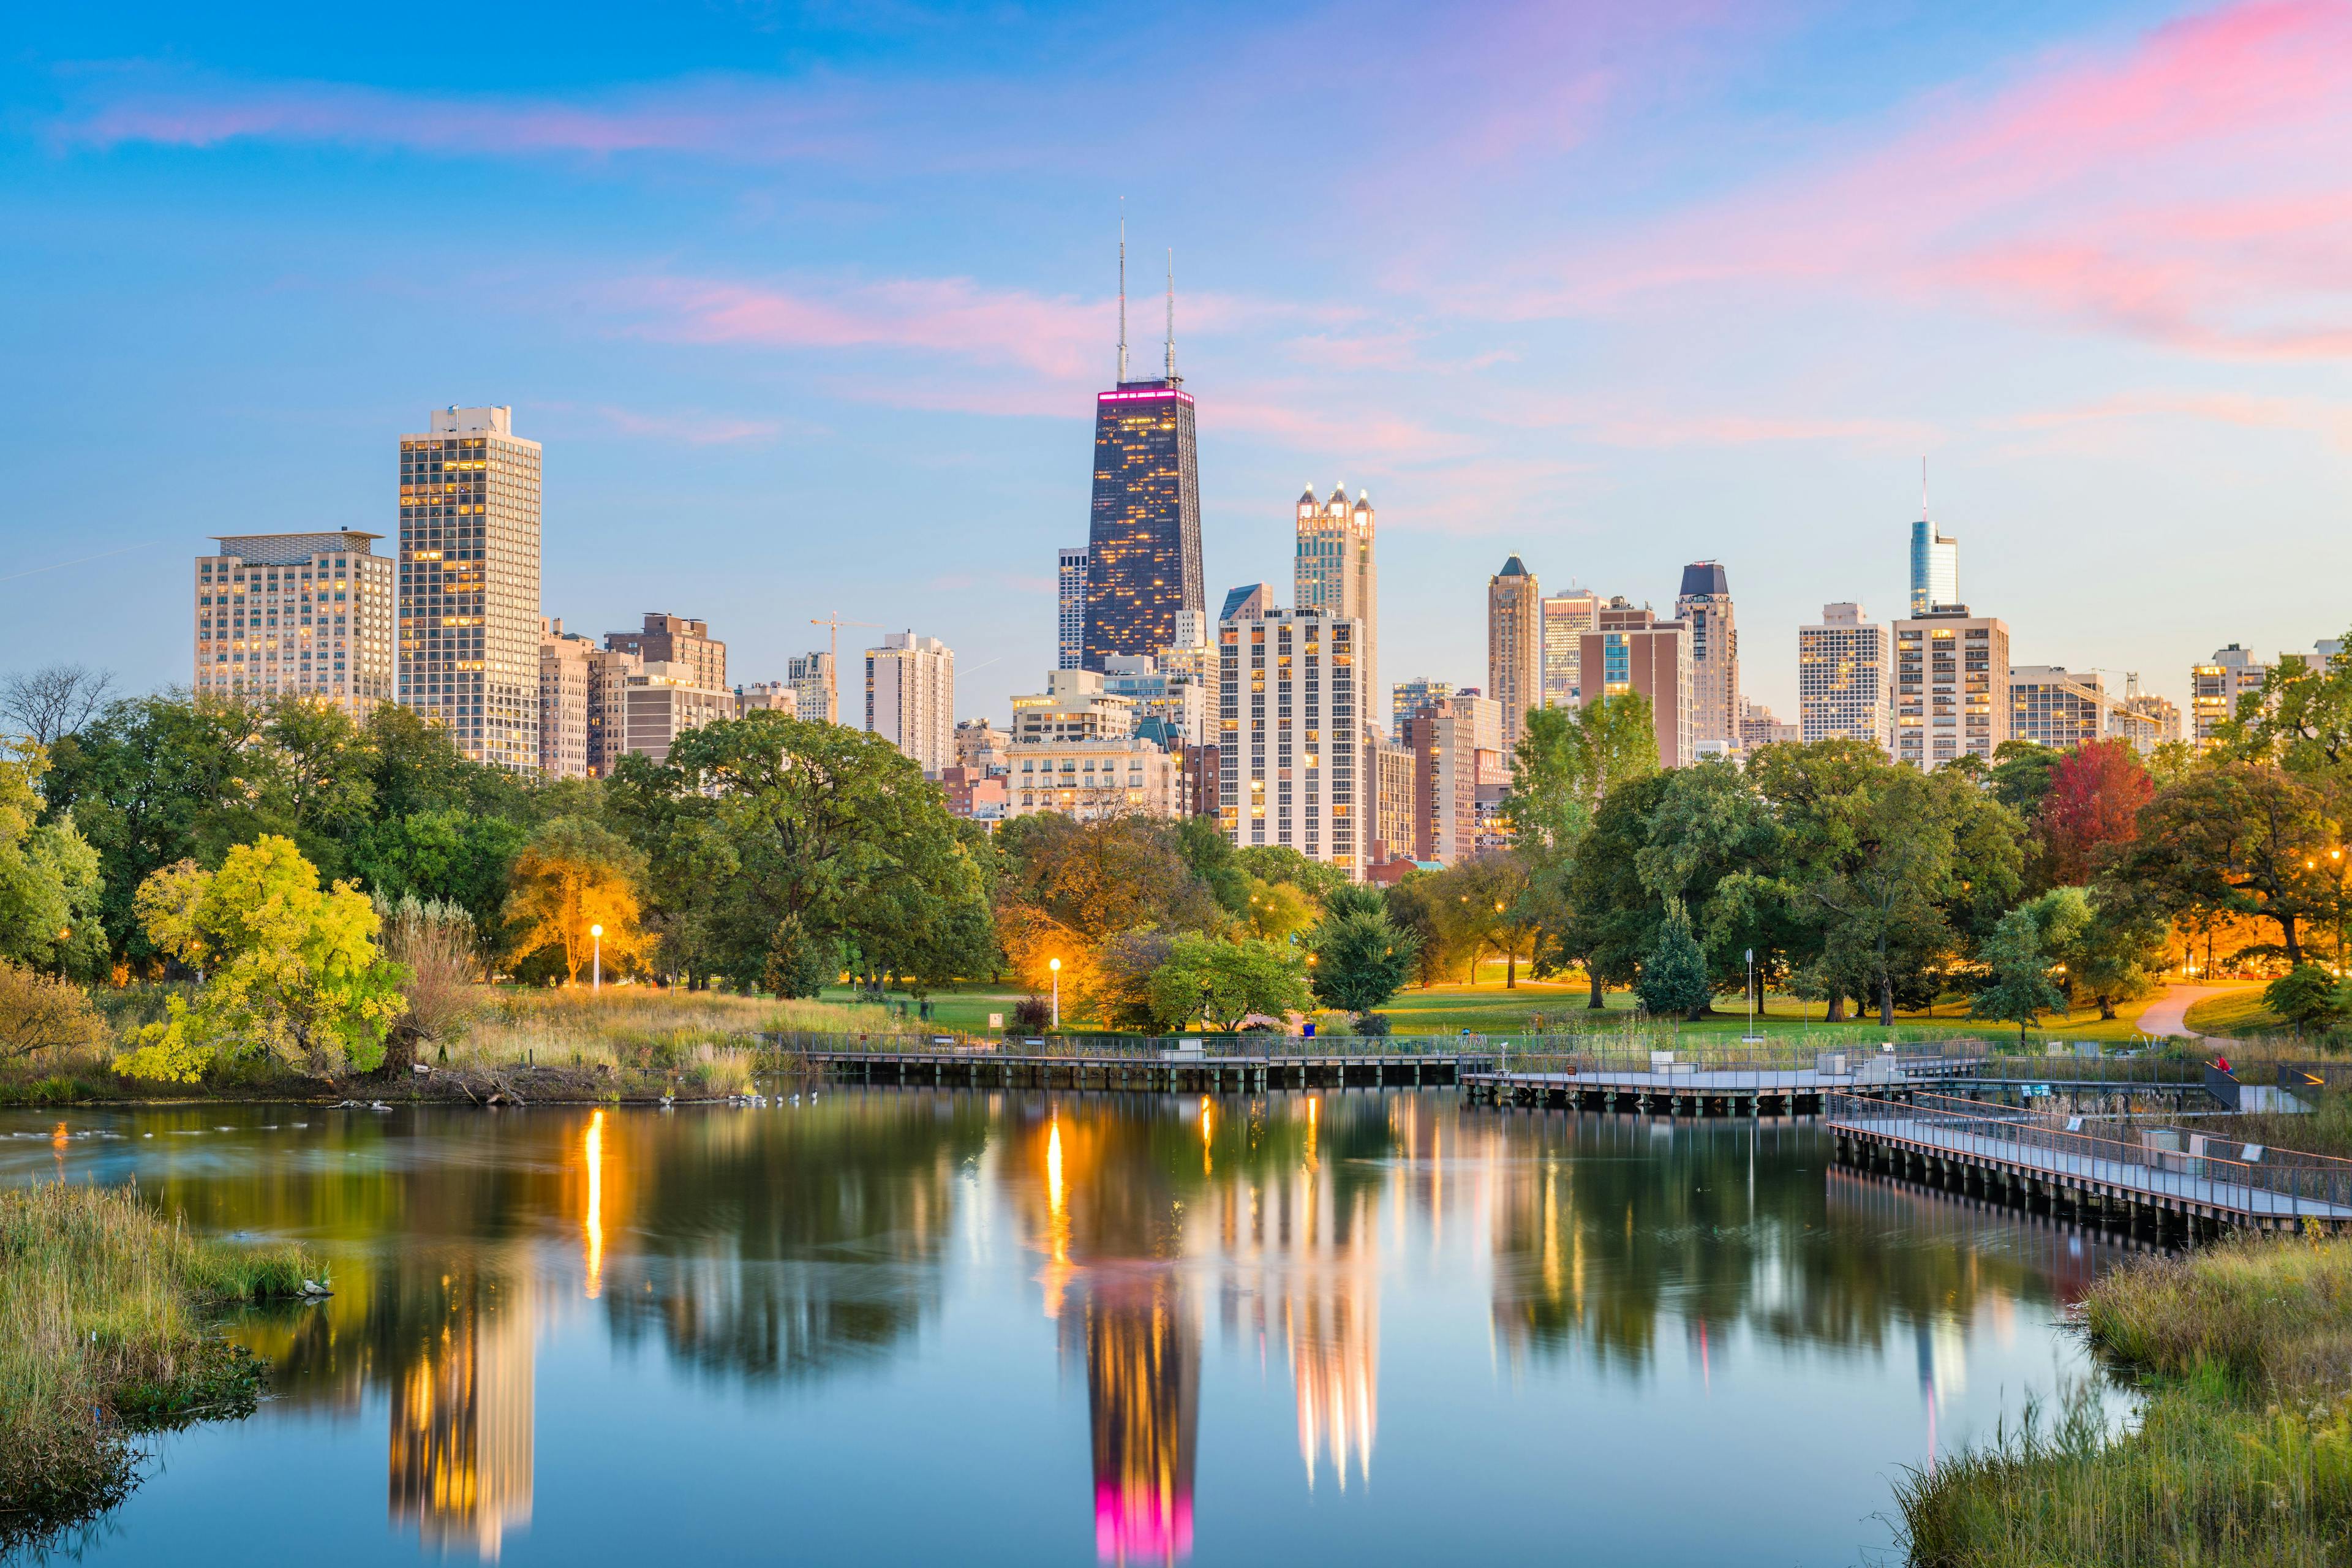 The American Academy of Ophthalmology is holding its 2022 annual meeting in Chicago. (Image courtesy of Adobe Stock) 